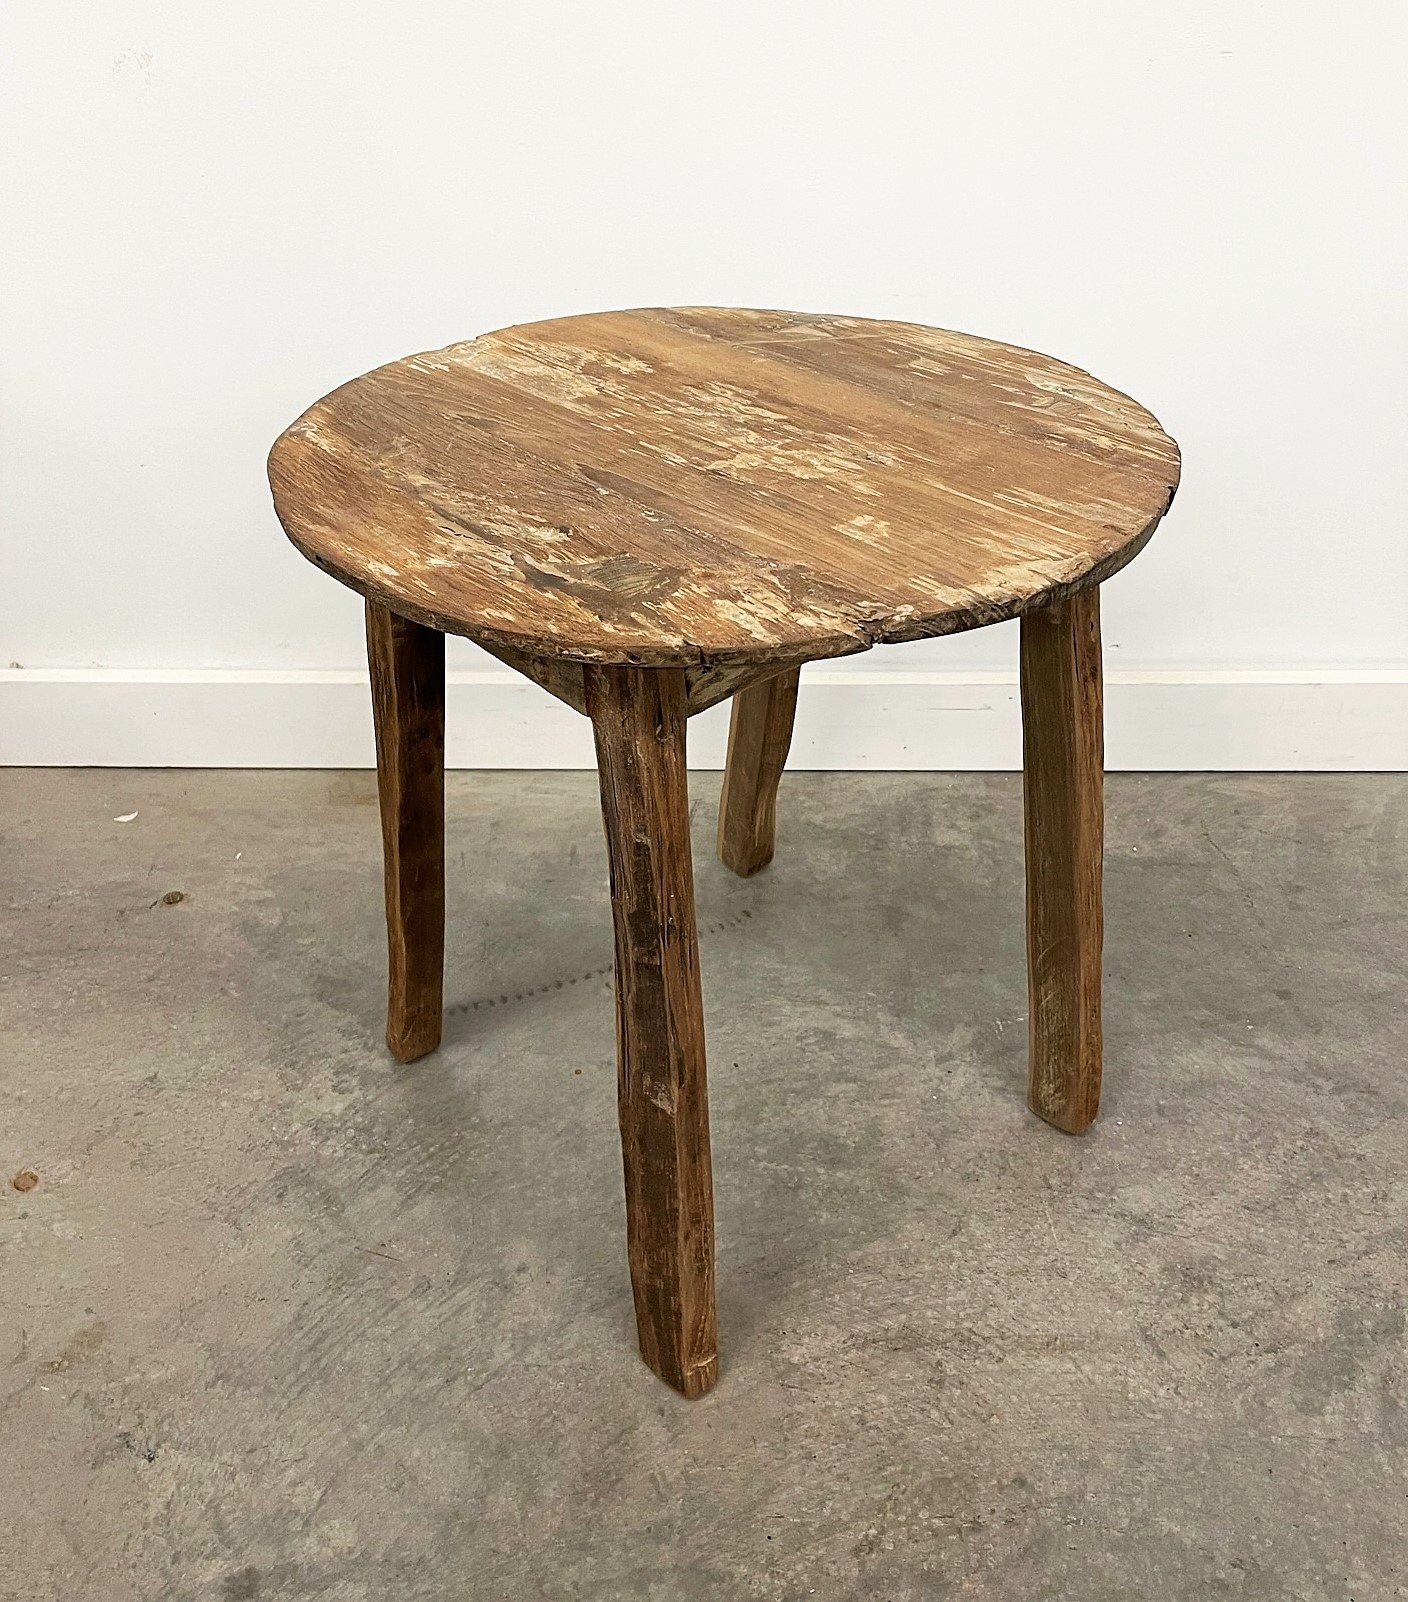 Rustic Reclaimed Teak Round Accent Table